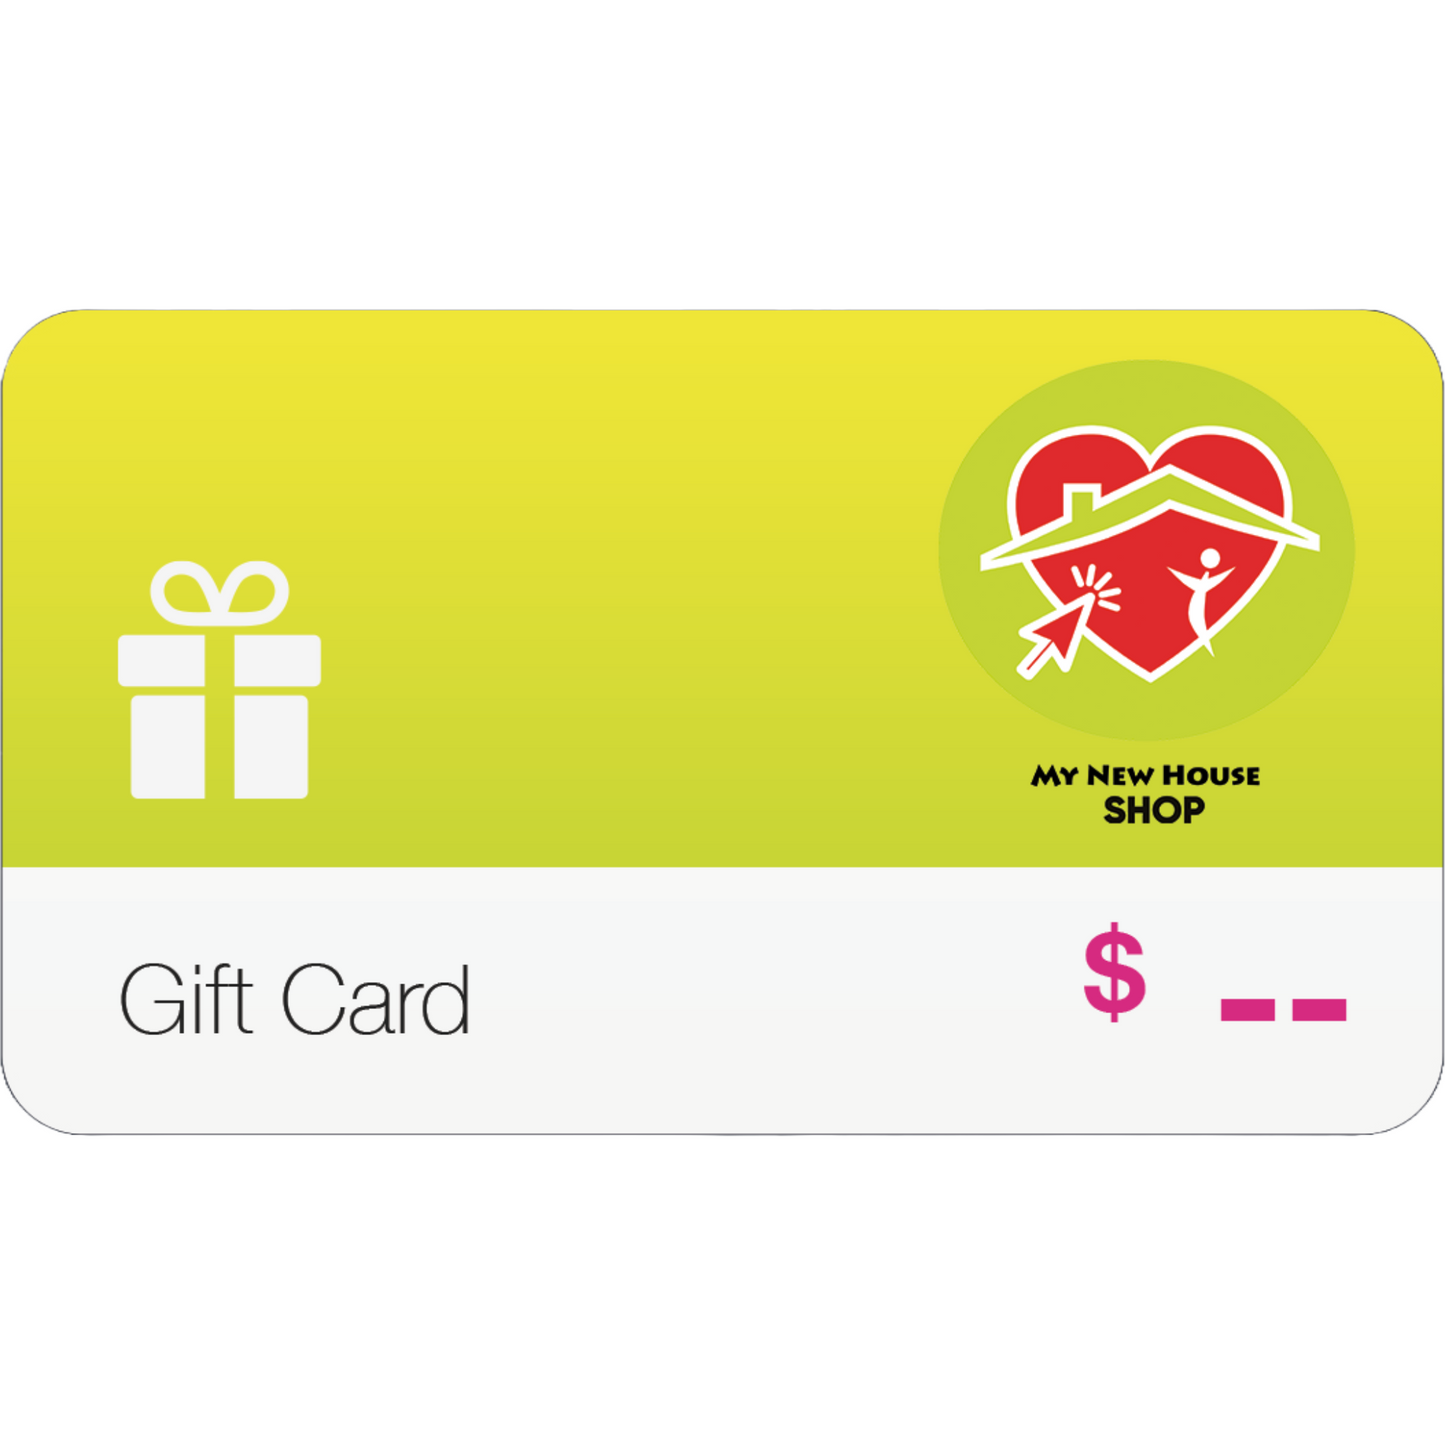 Shop with Heart: Every Click and Save Gift Card Supports the My New House Cause